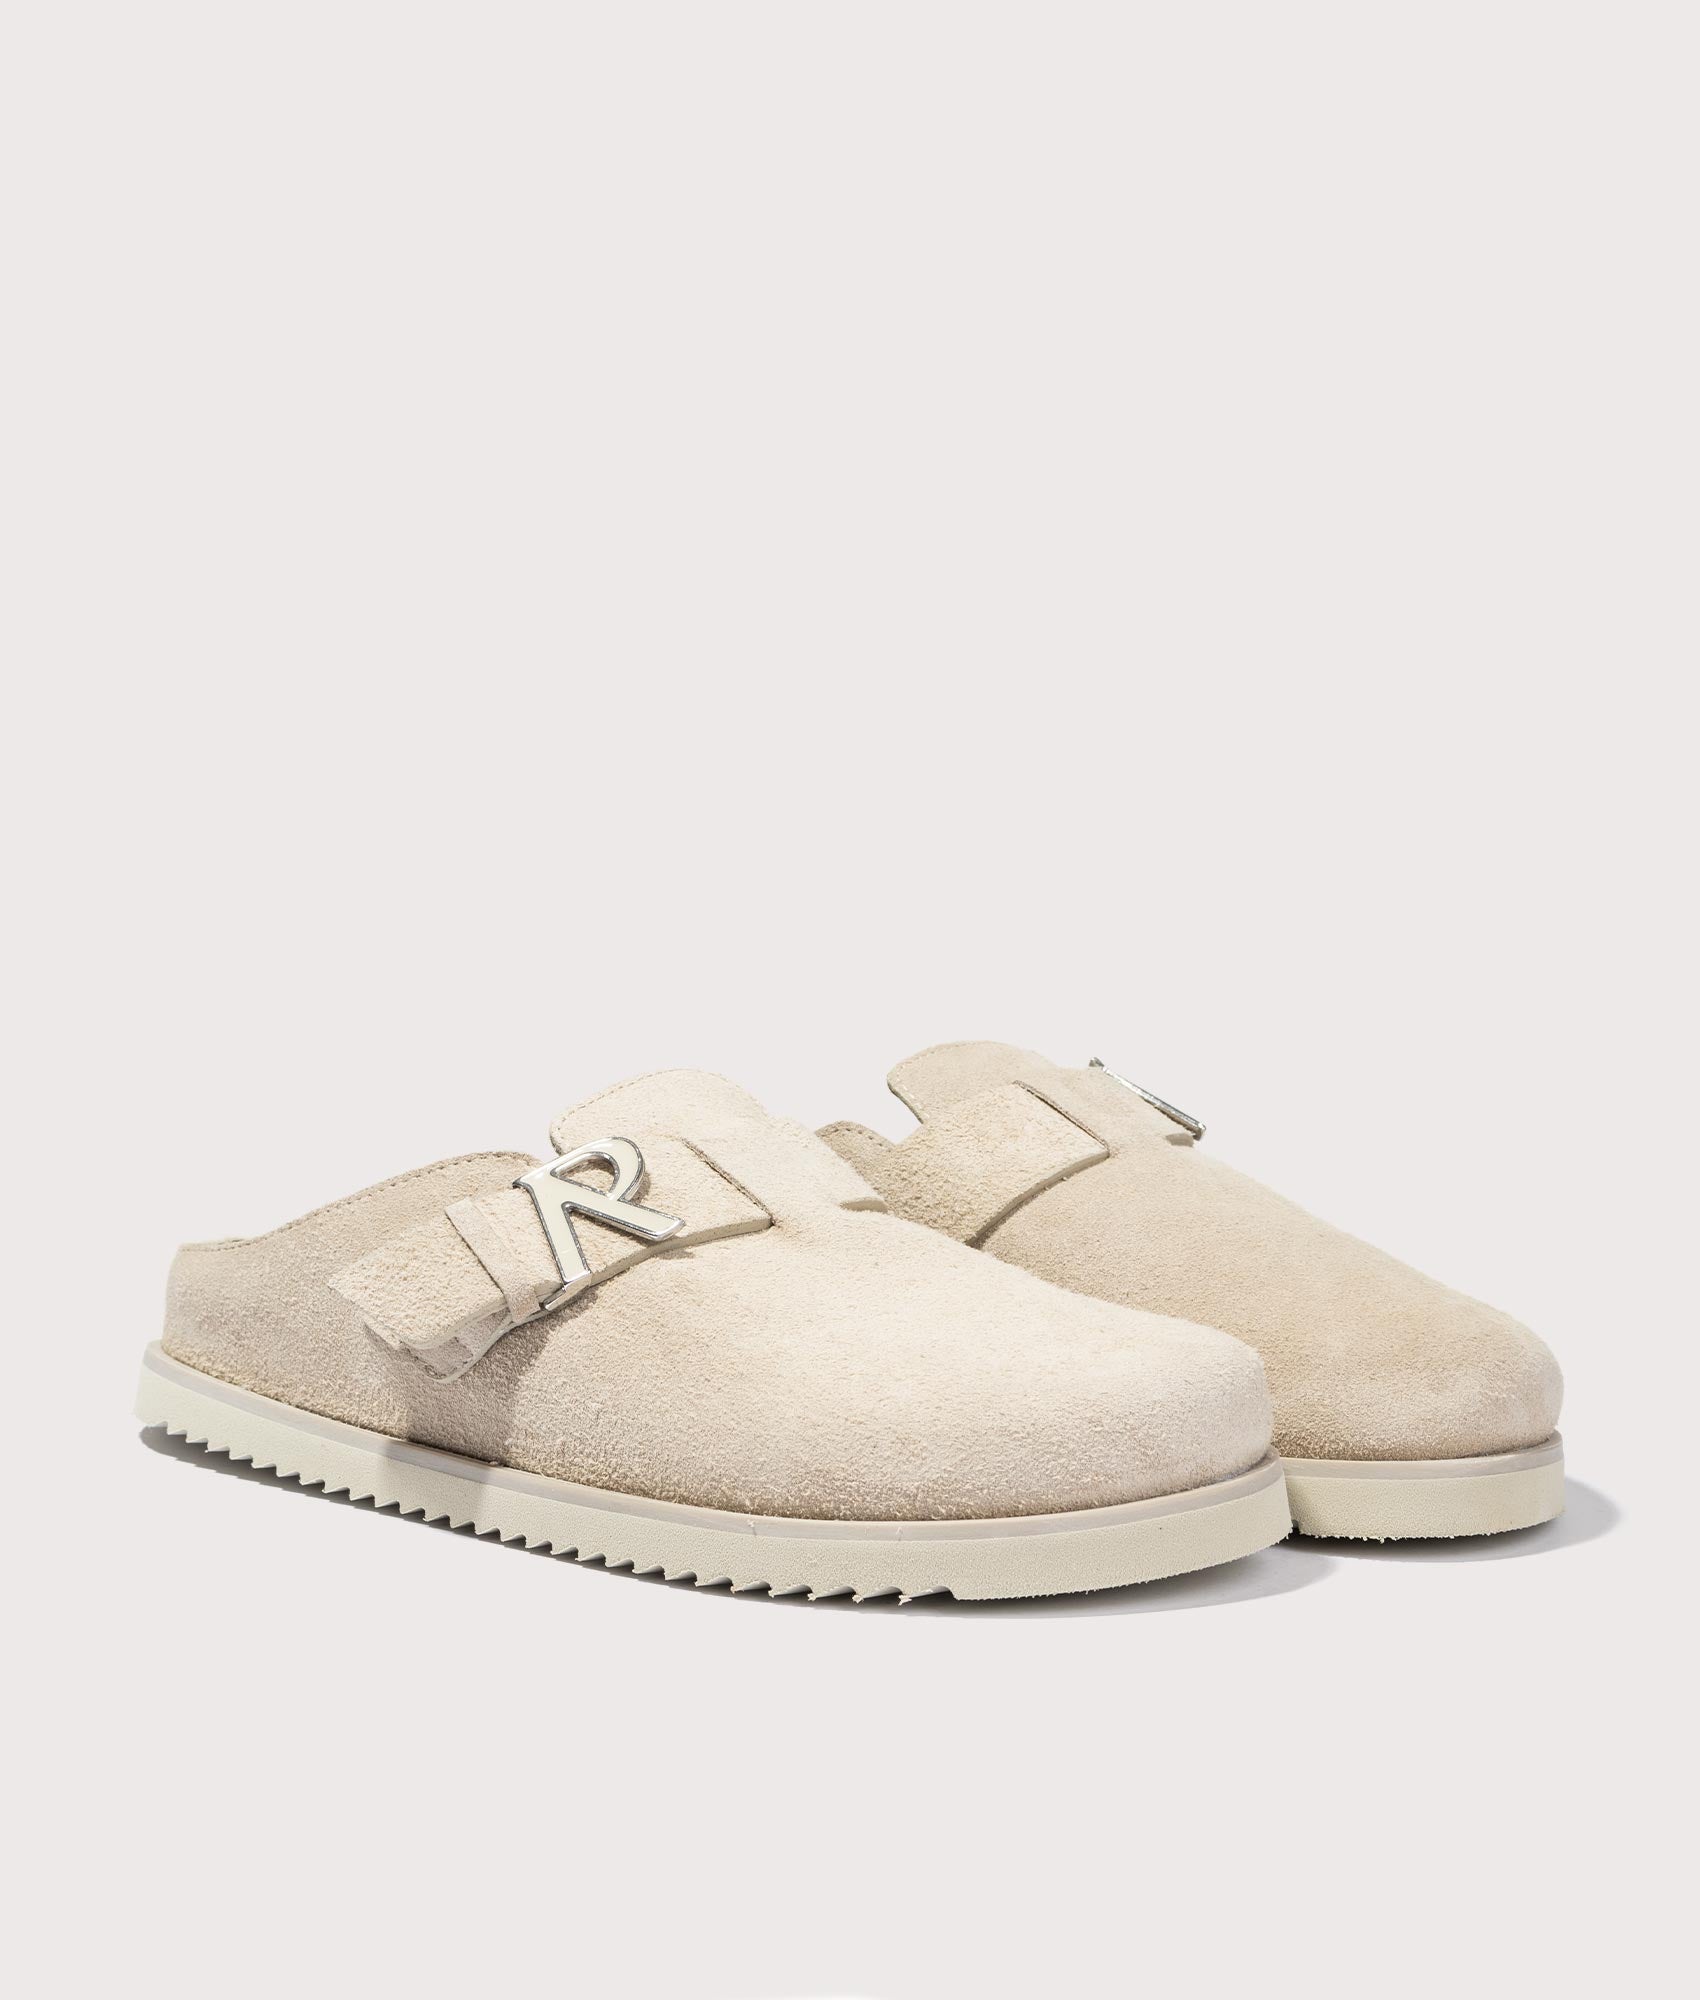 Represent Mens Initial Mules - Colour: 38 Taupe - Size: 10